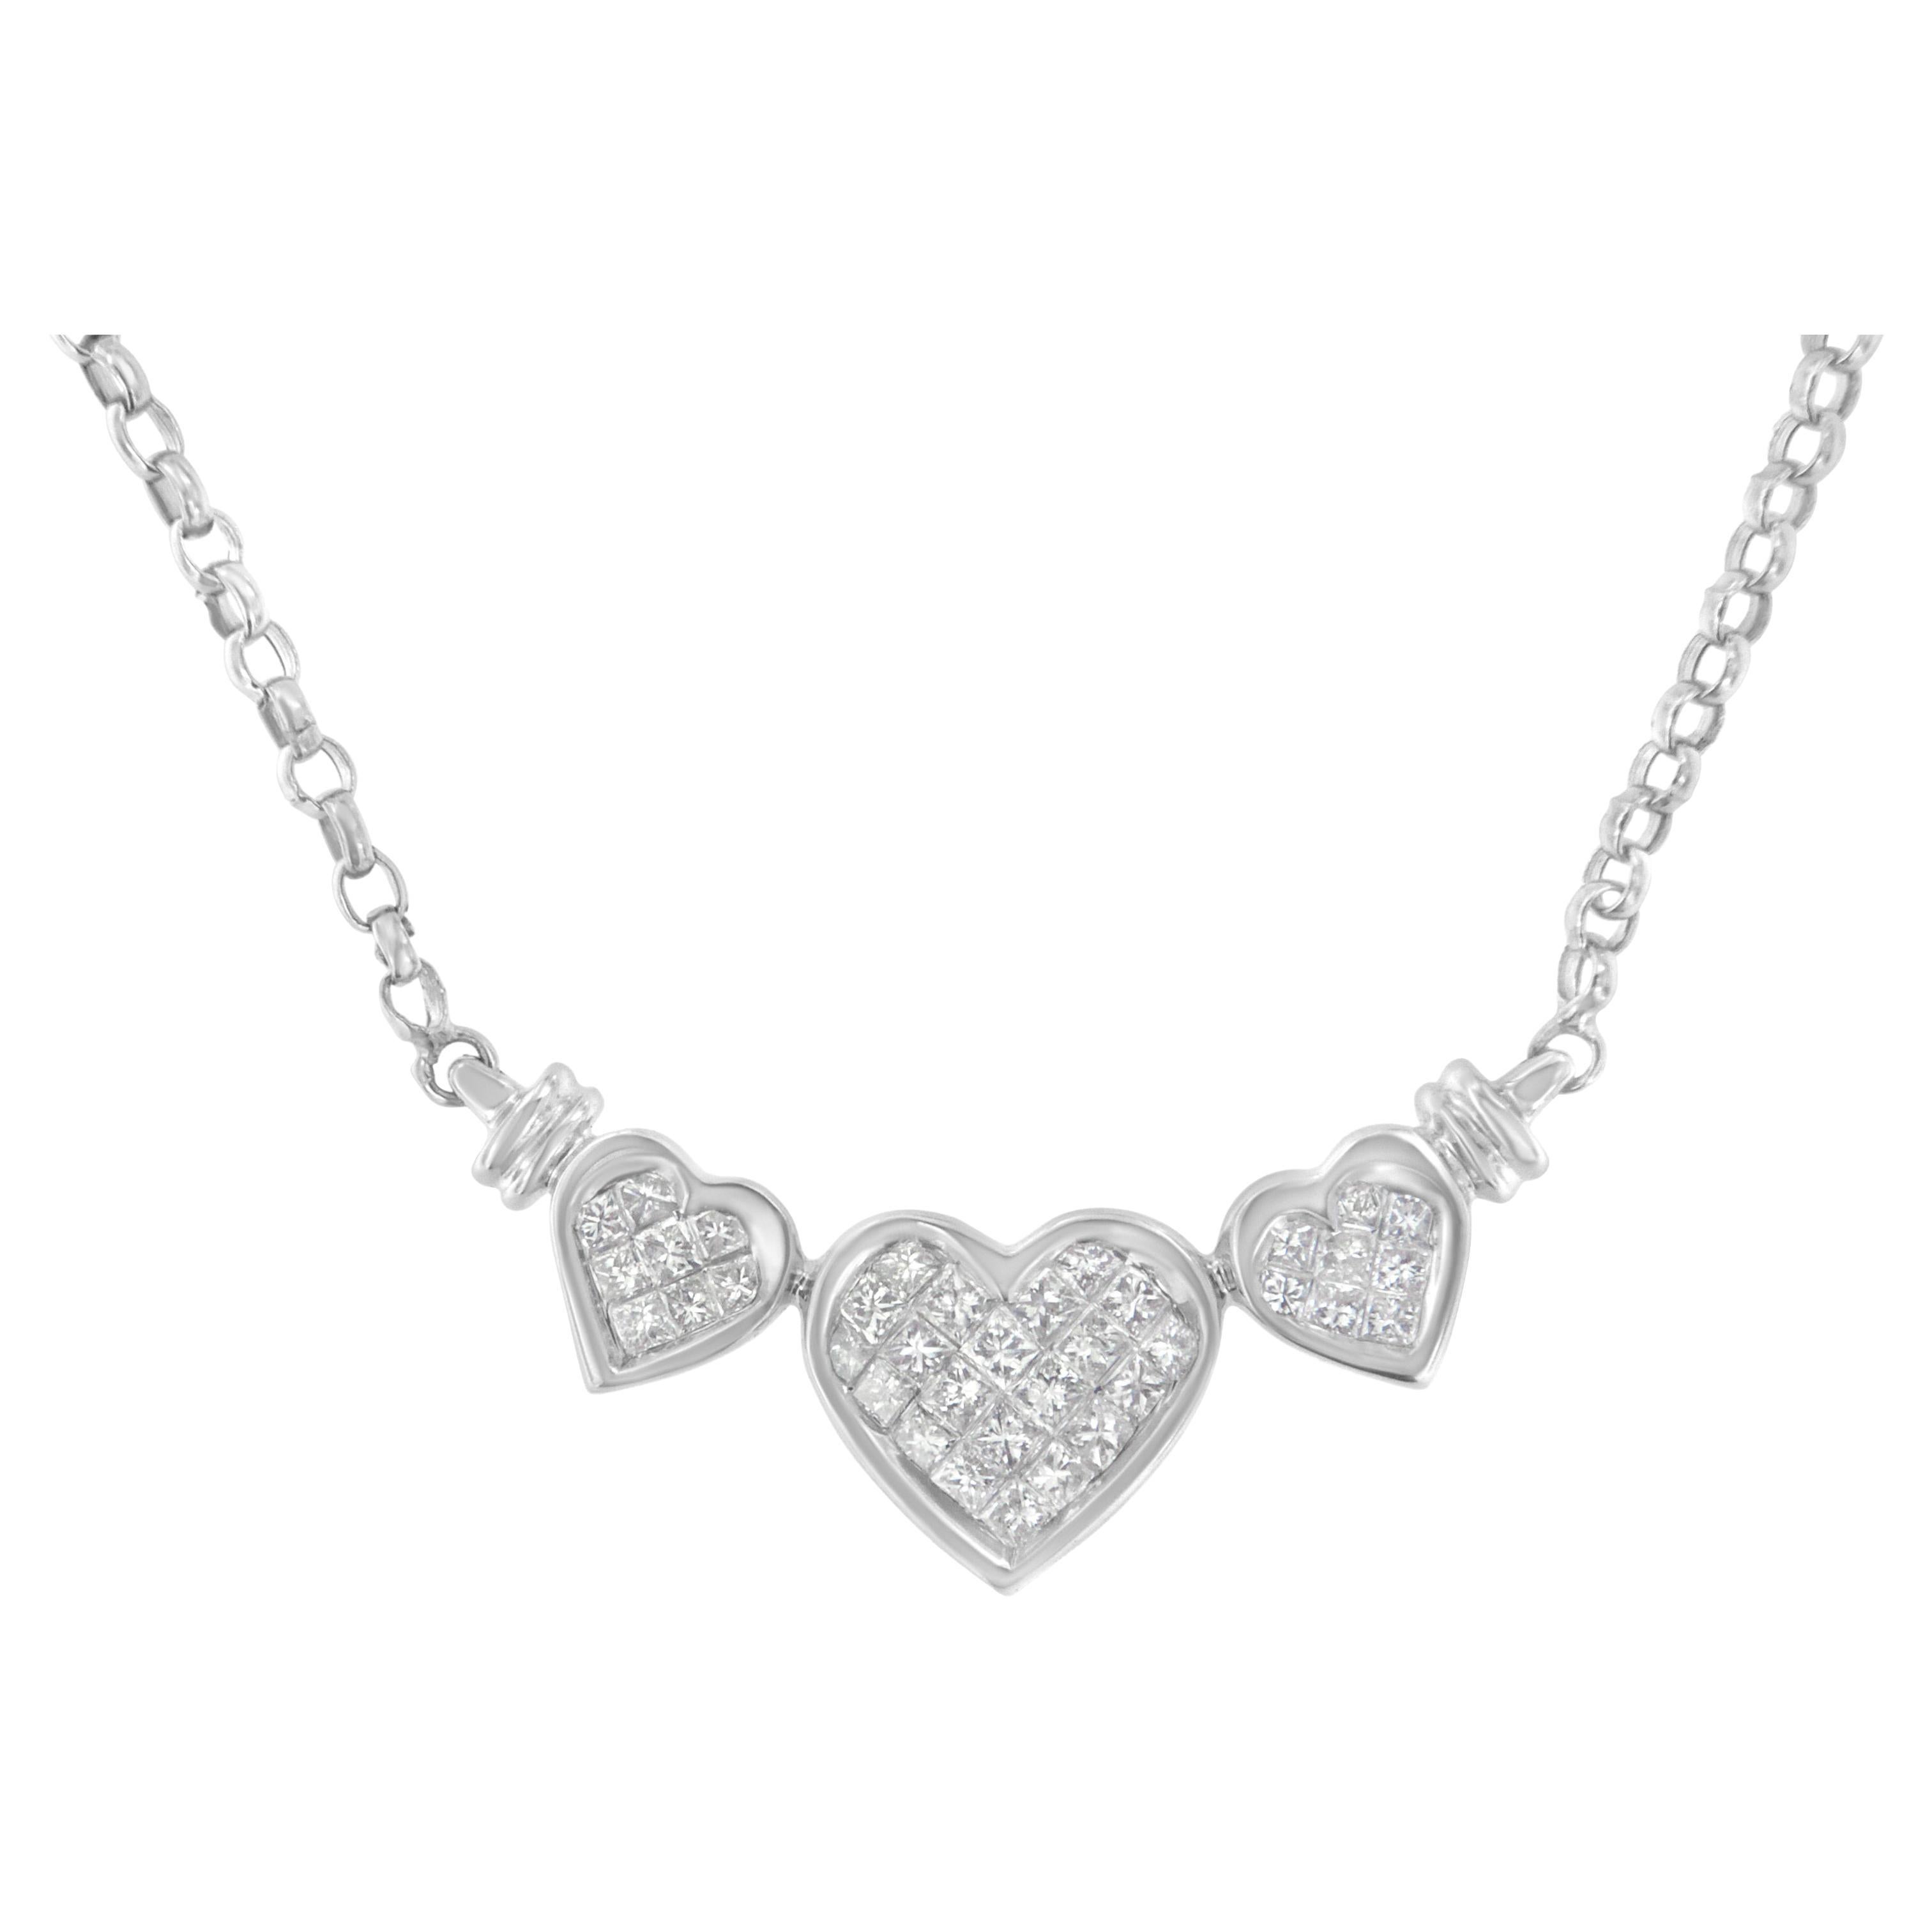 14K White Gold 1.00 Carat Diamond Triple Heart Link Necklace with Box Chain